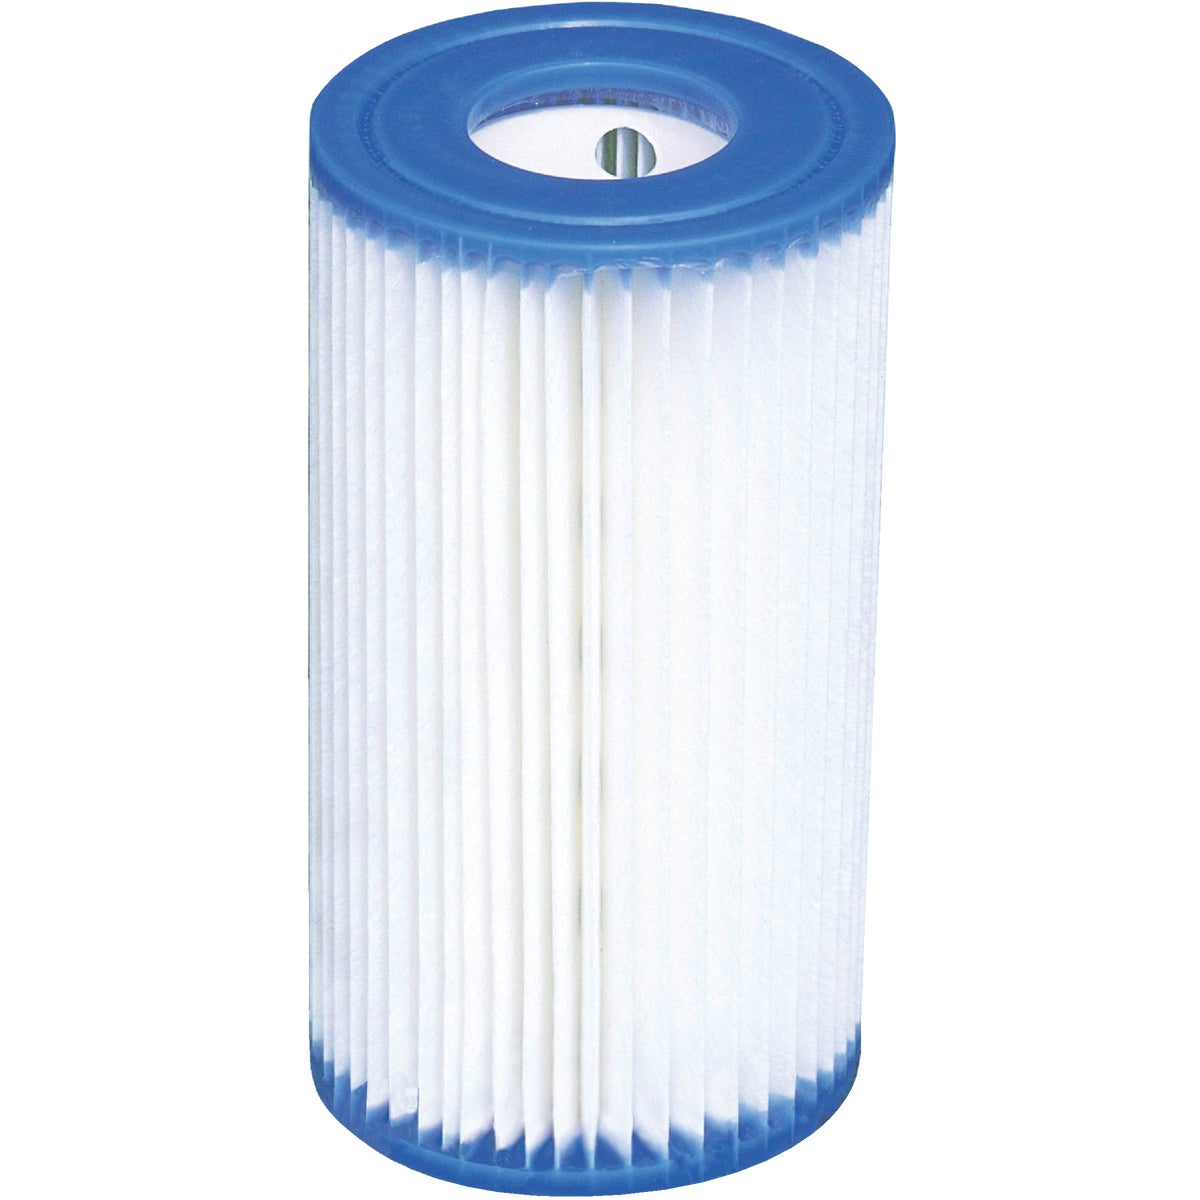 Item 800672, Easy to clean Dacron filter material for above ground pools.